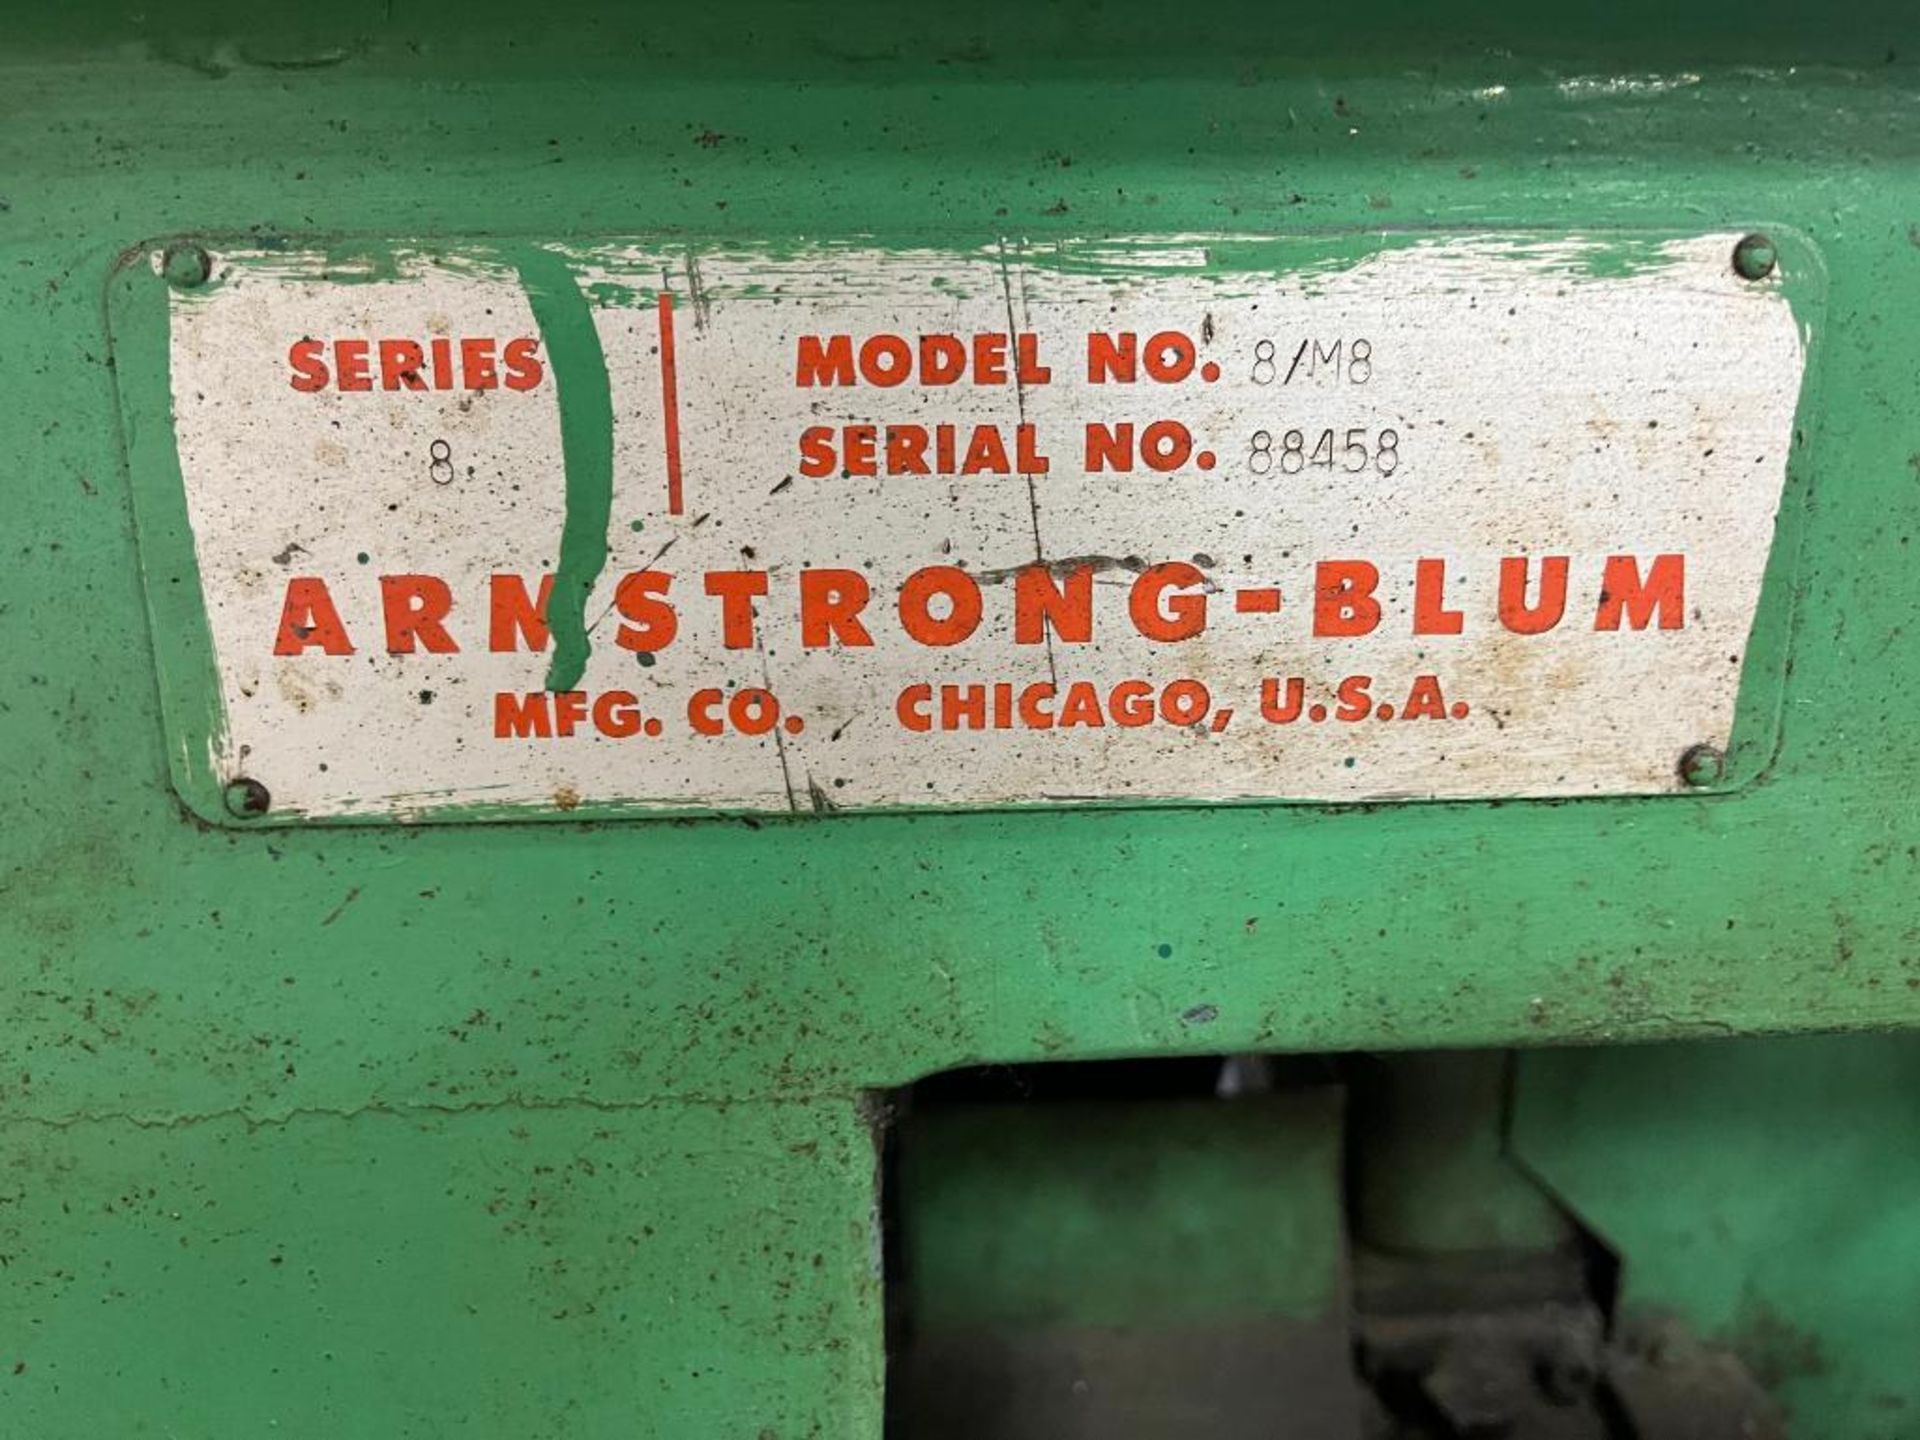 Armstrong Blum Marvel Rollin Band Saw Mdl. 8/M8, S/N 88458 - Image 10 of 10